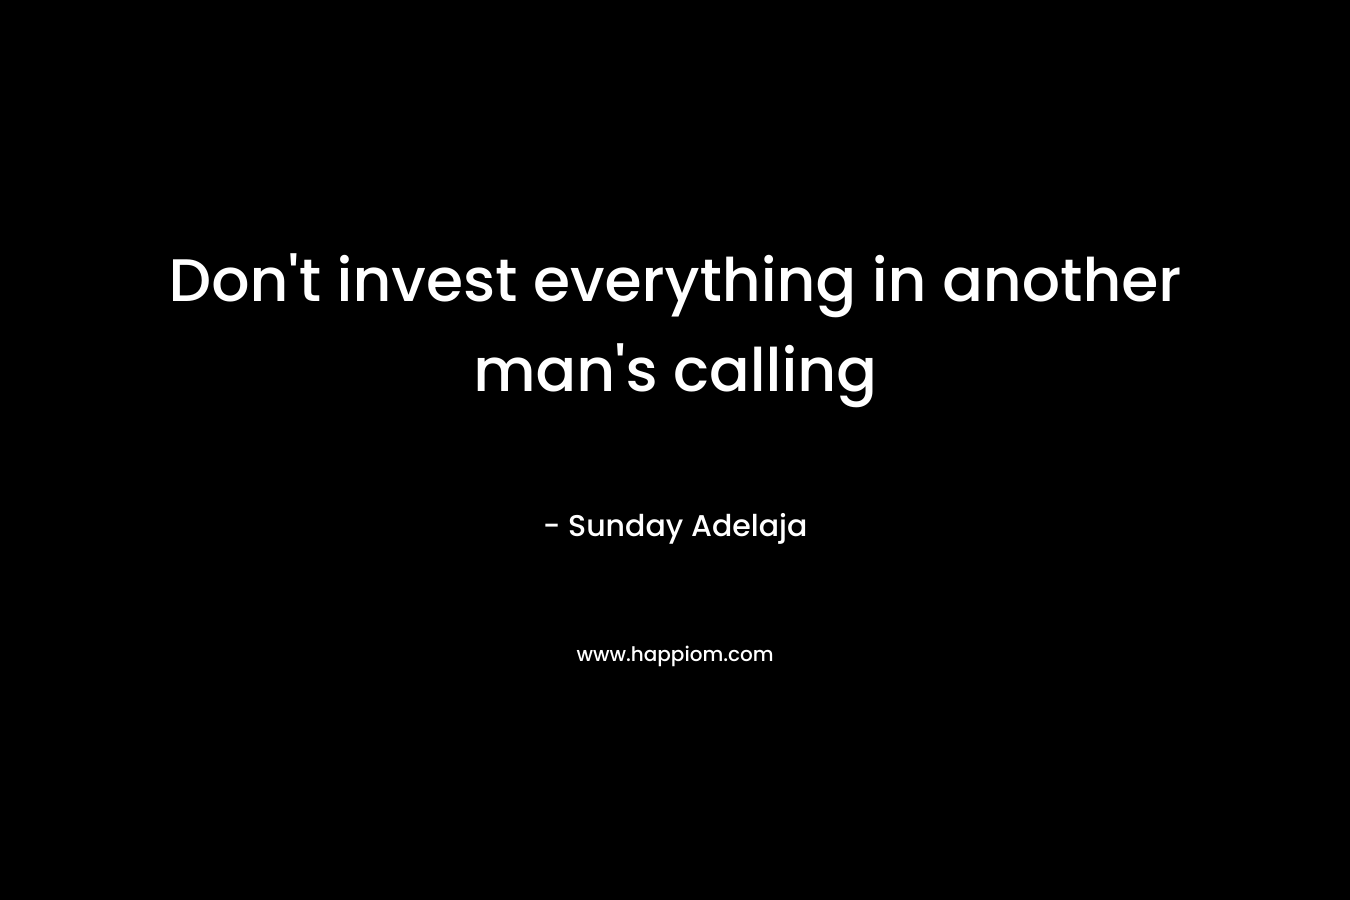 Don't invest everything in another man's calling